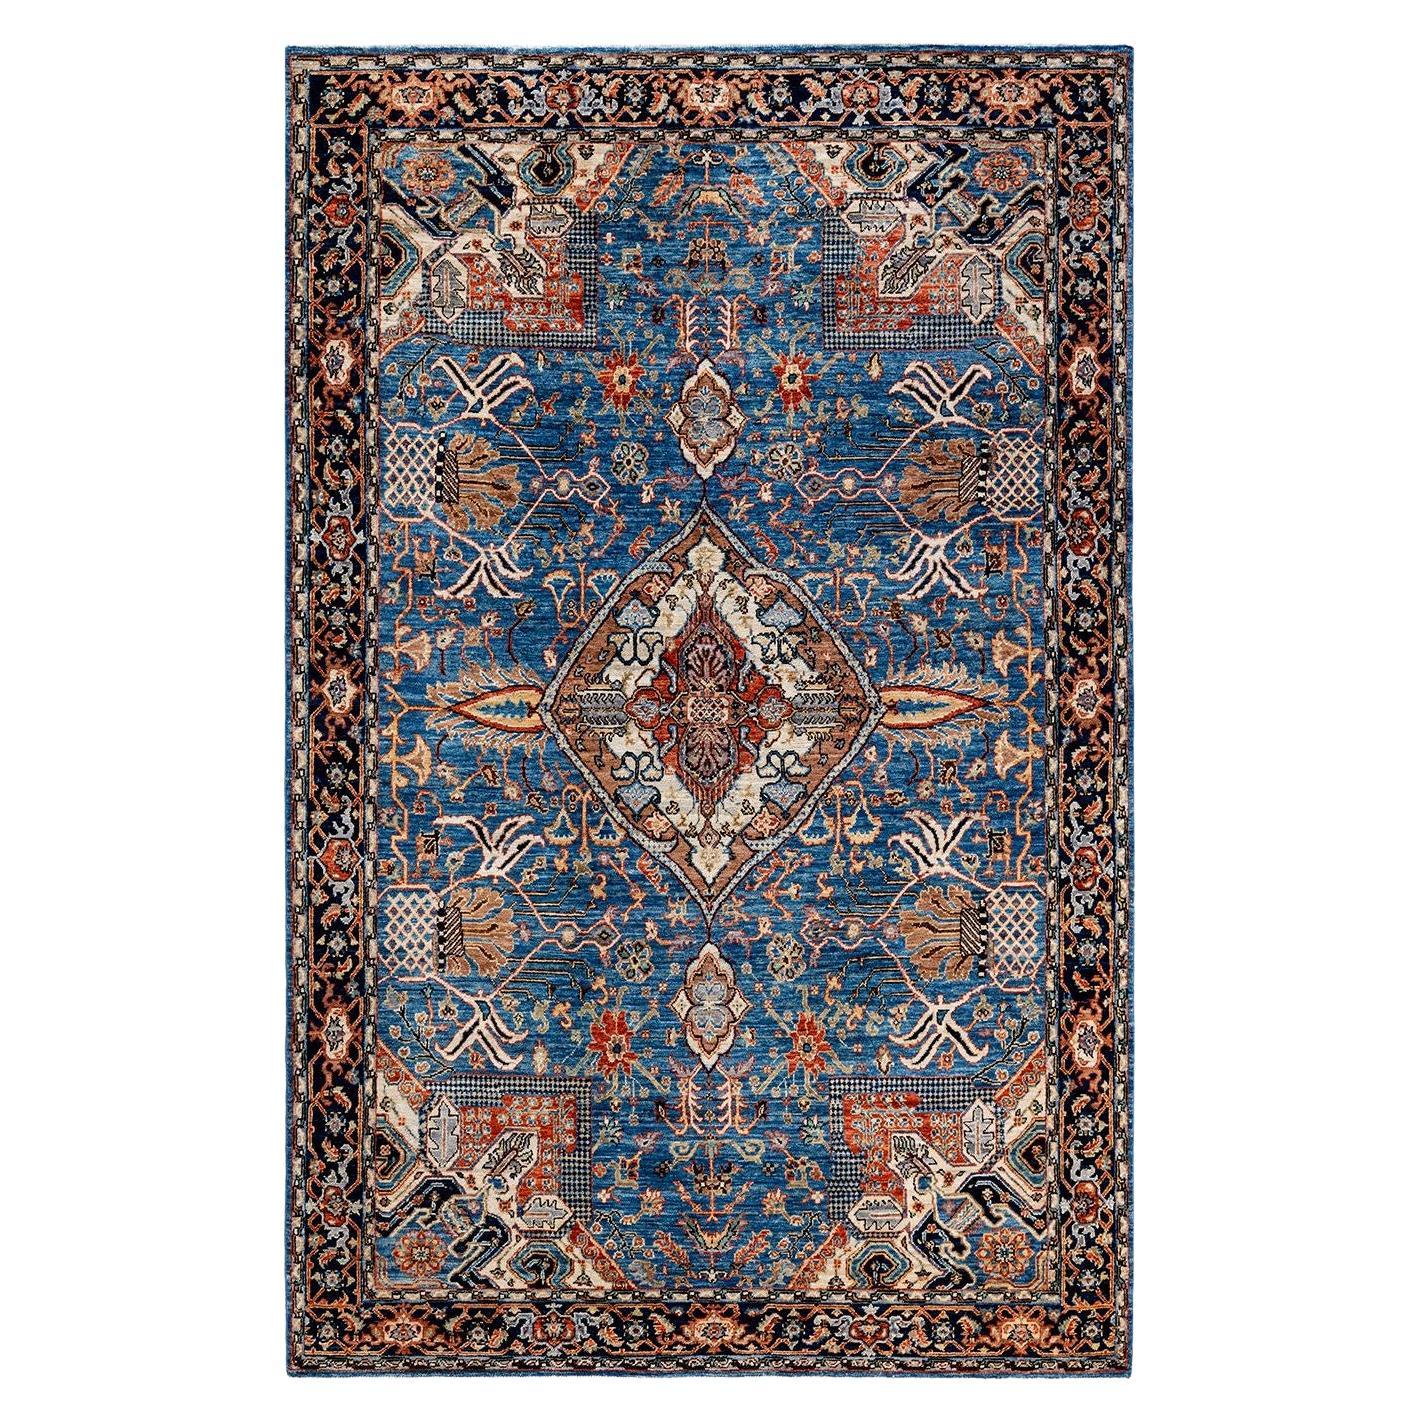 Serapi, One-of-a-kind hand knotted Runner Rug, Light Blue